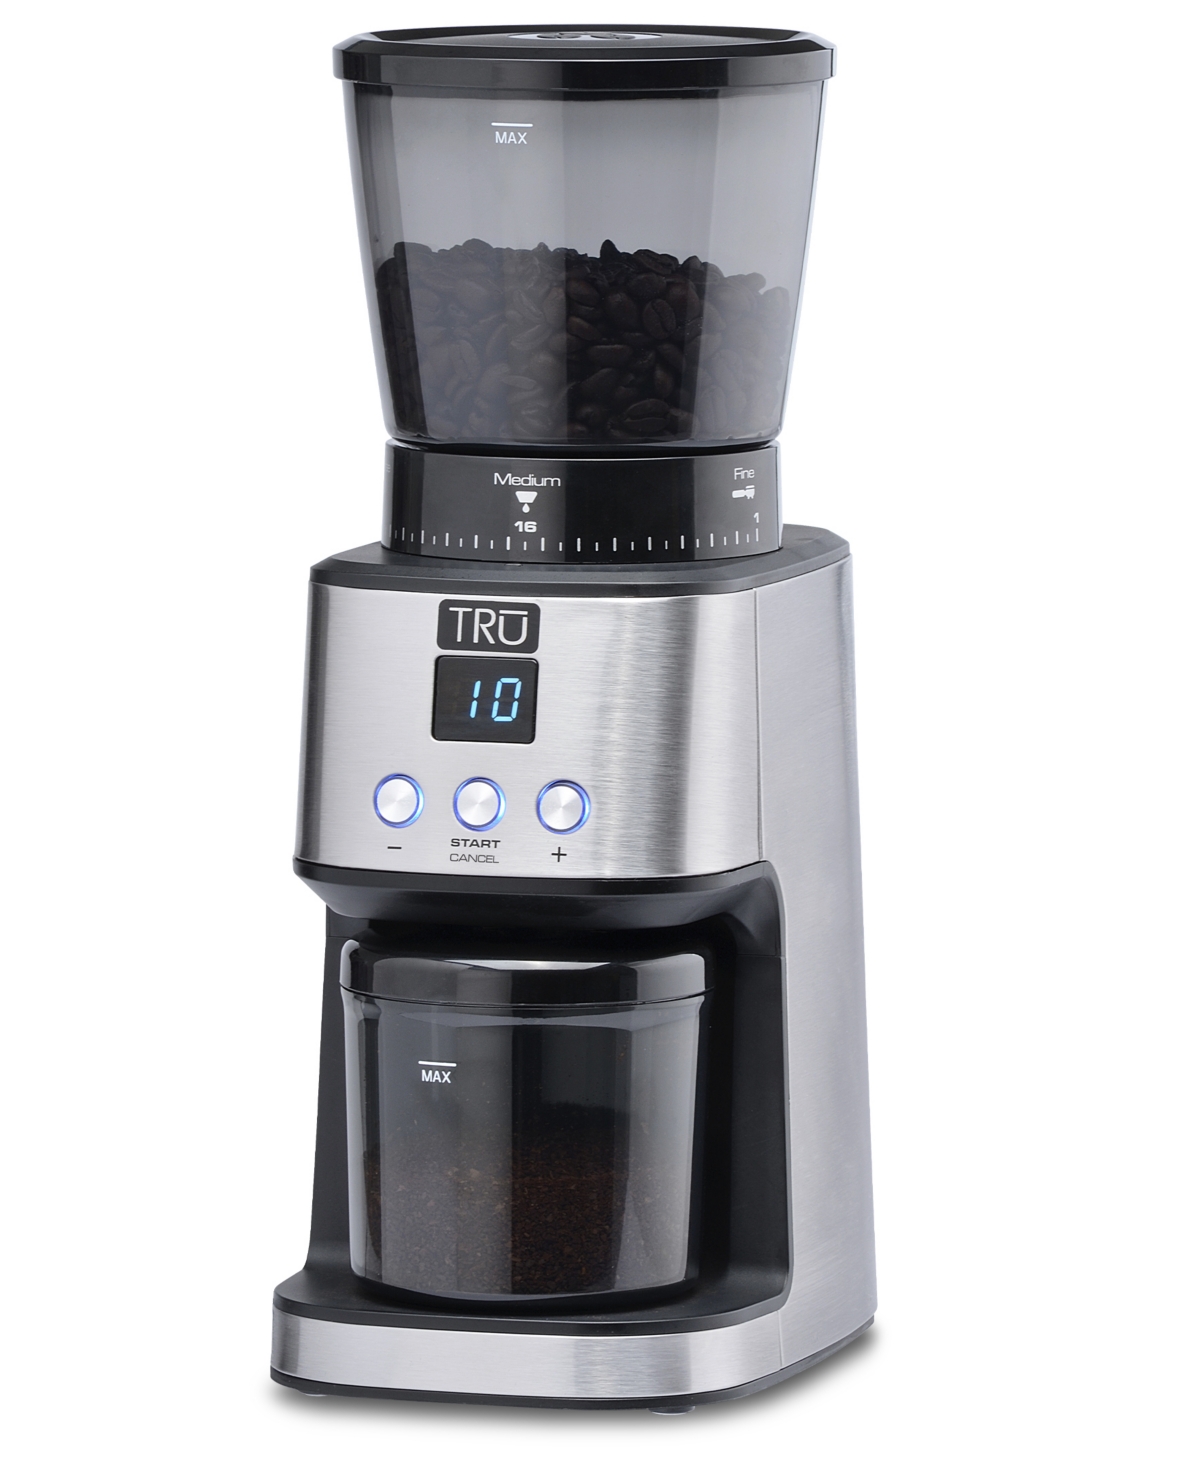 Tru Large Capacity Conical Burr Grinder In Silver